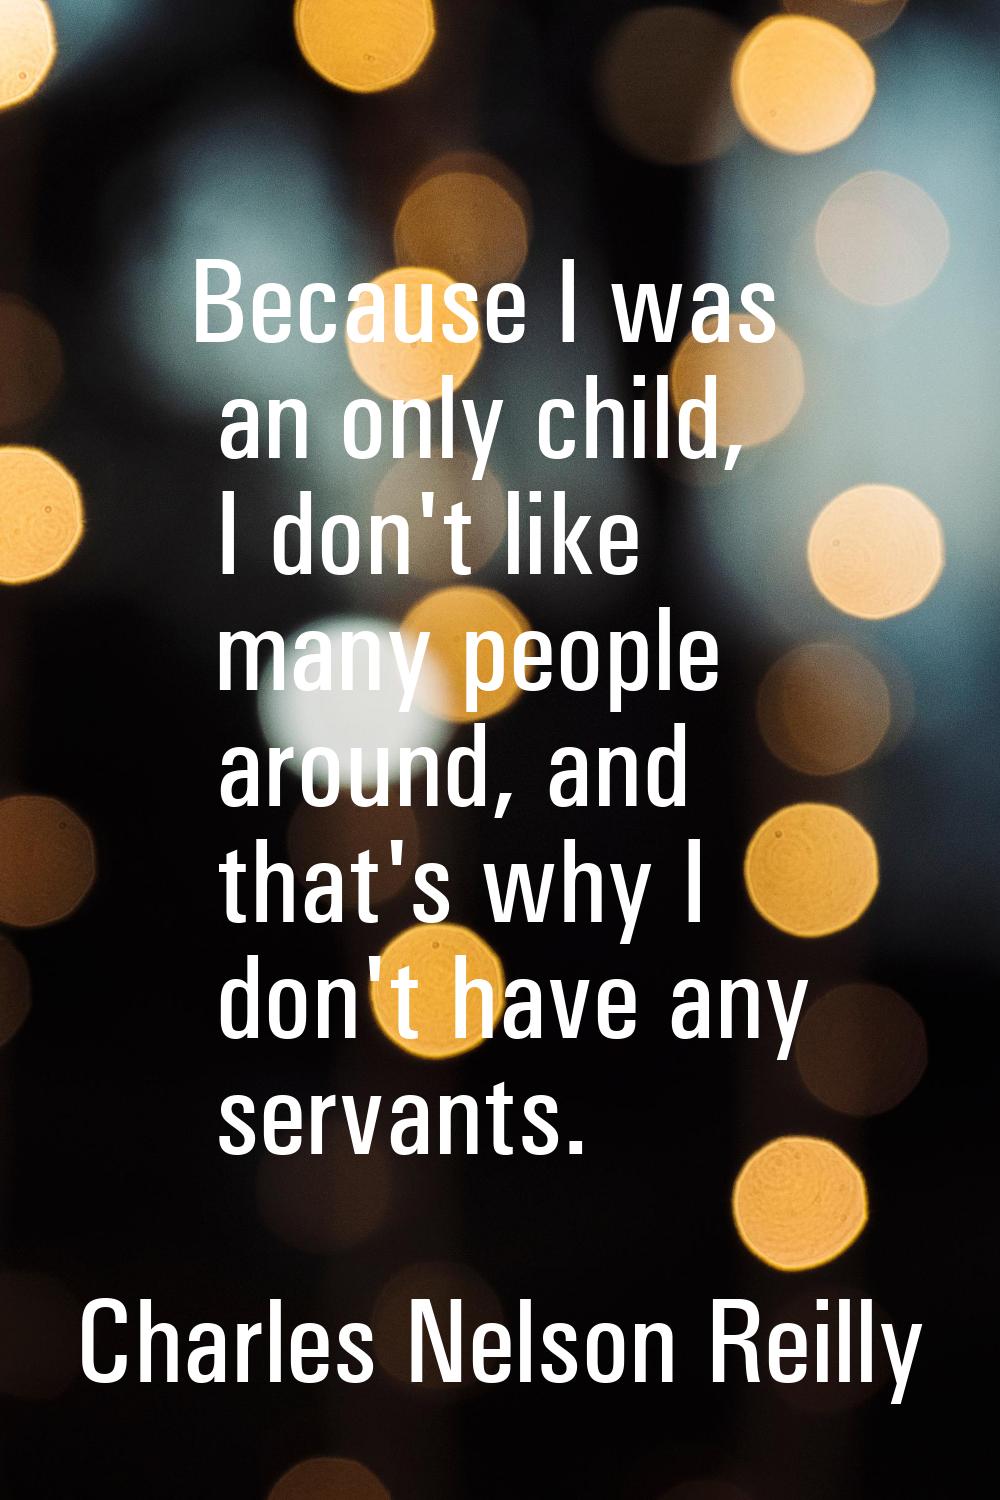 Because I was an only child, I don't like many people around, and that's why I don't have any serva